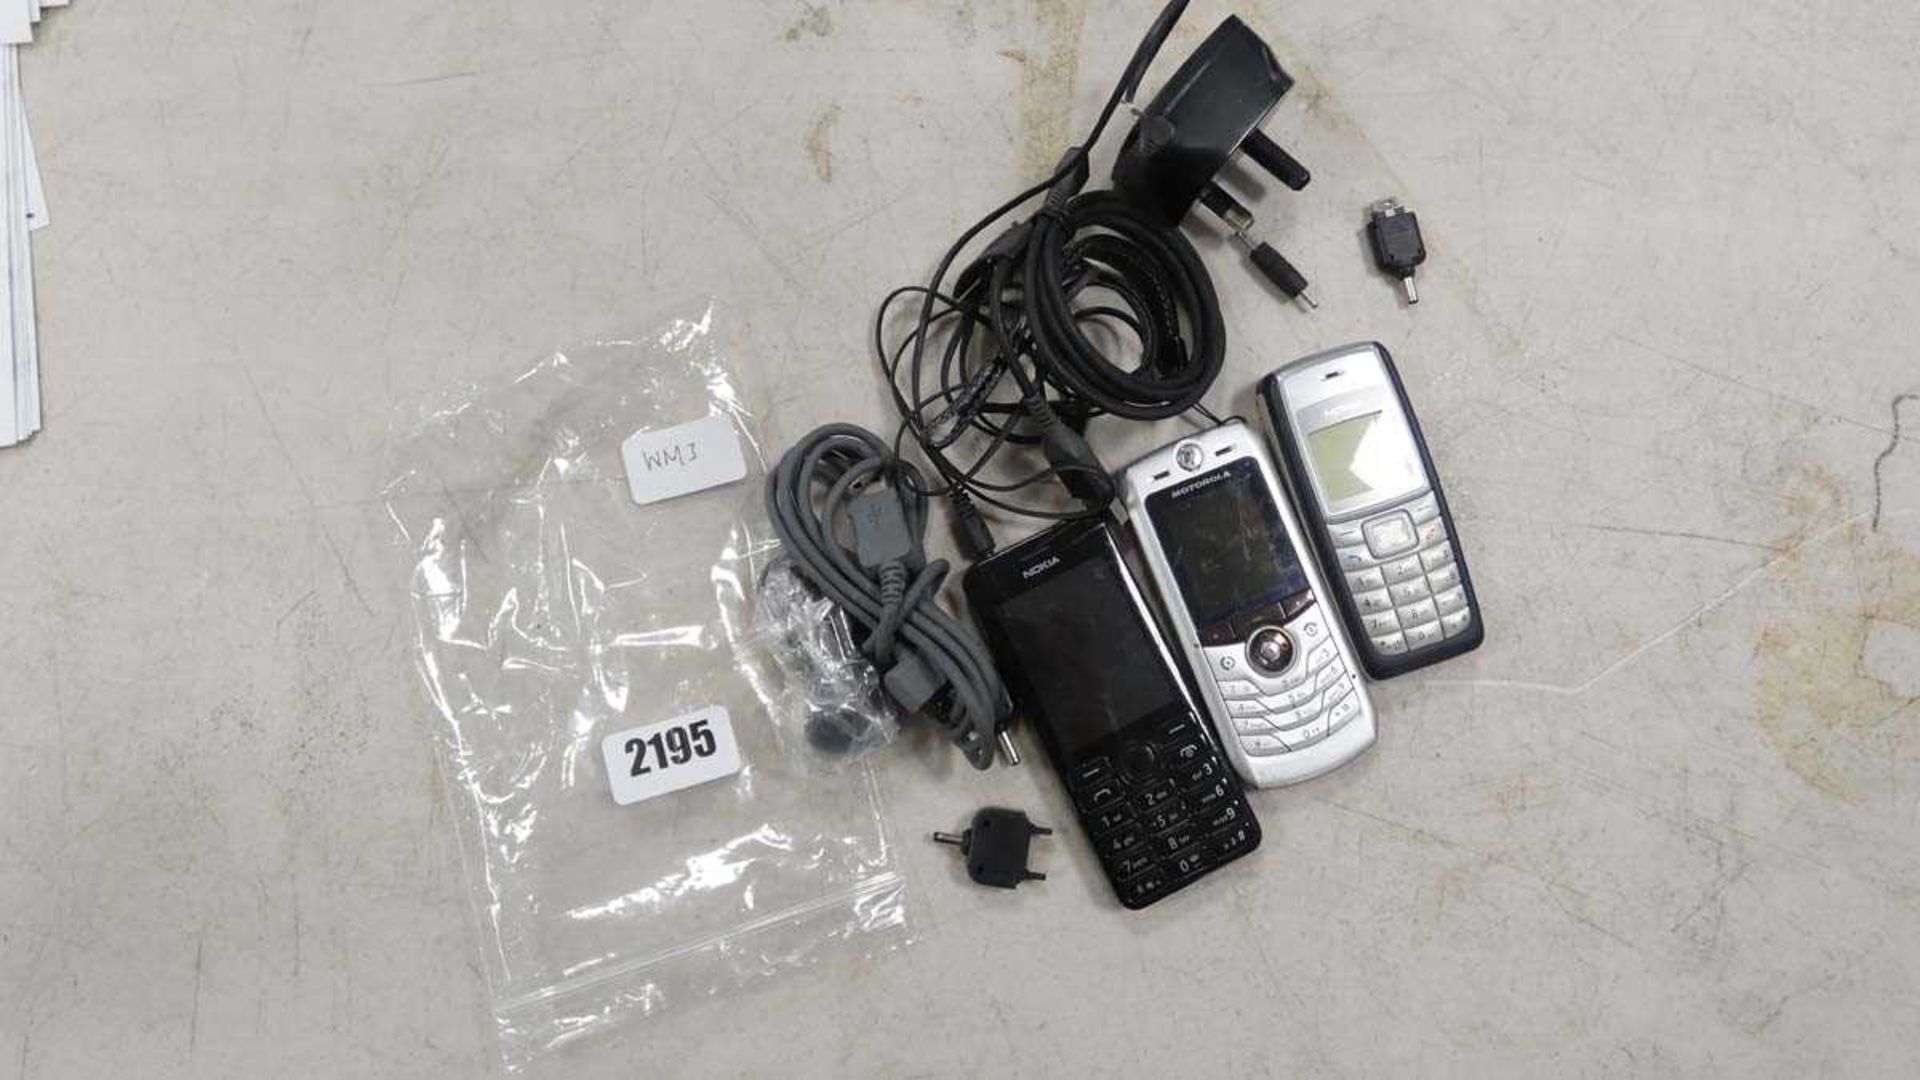 Various mobile phones to inc. Nokia button phones and others with chargers